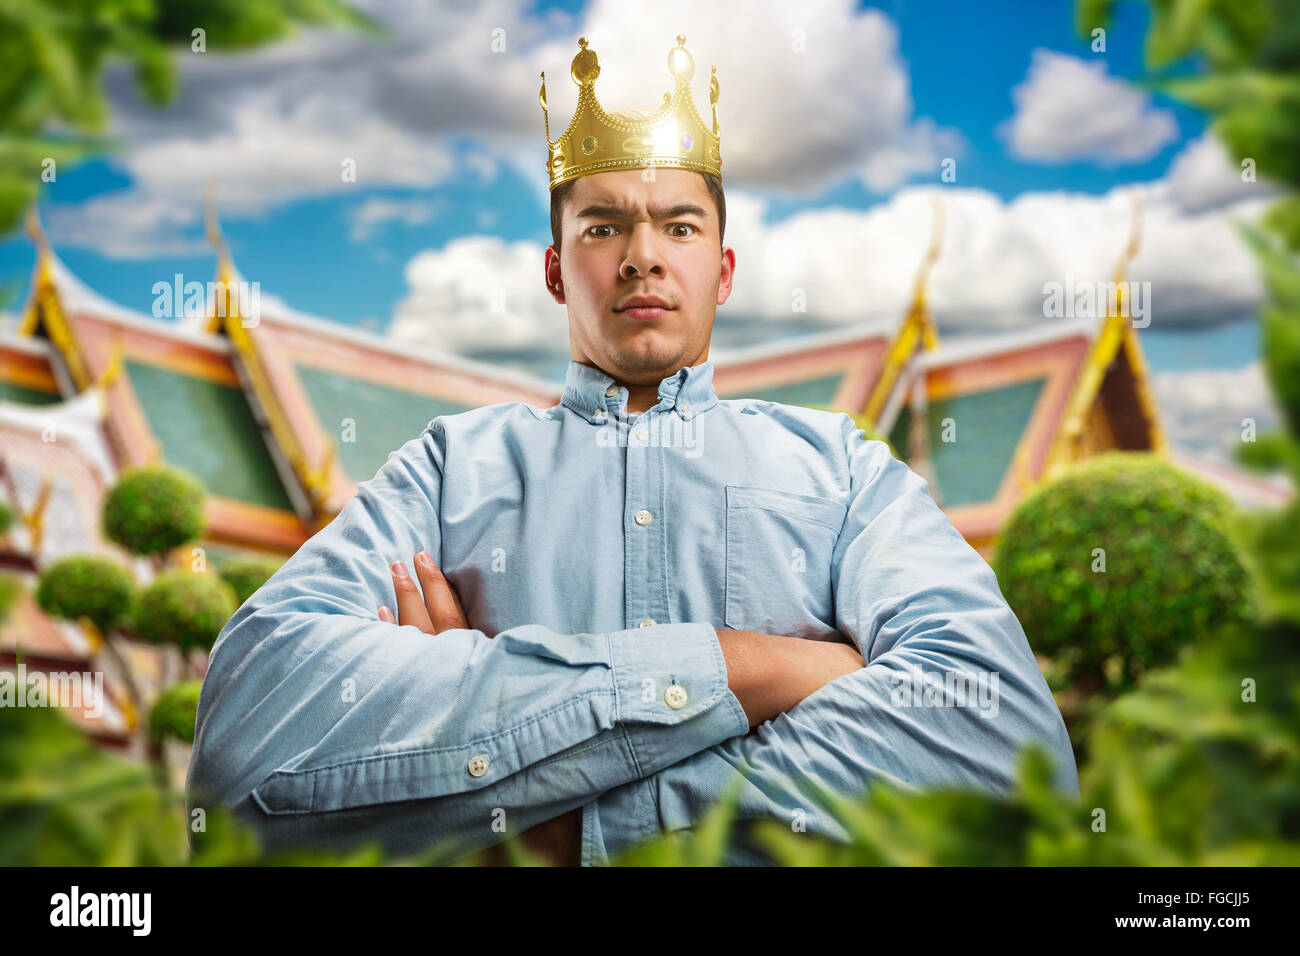 Serious man with crown Stock Photo